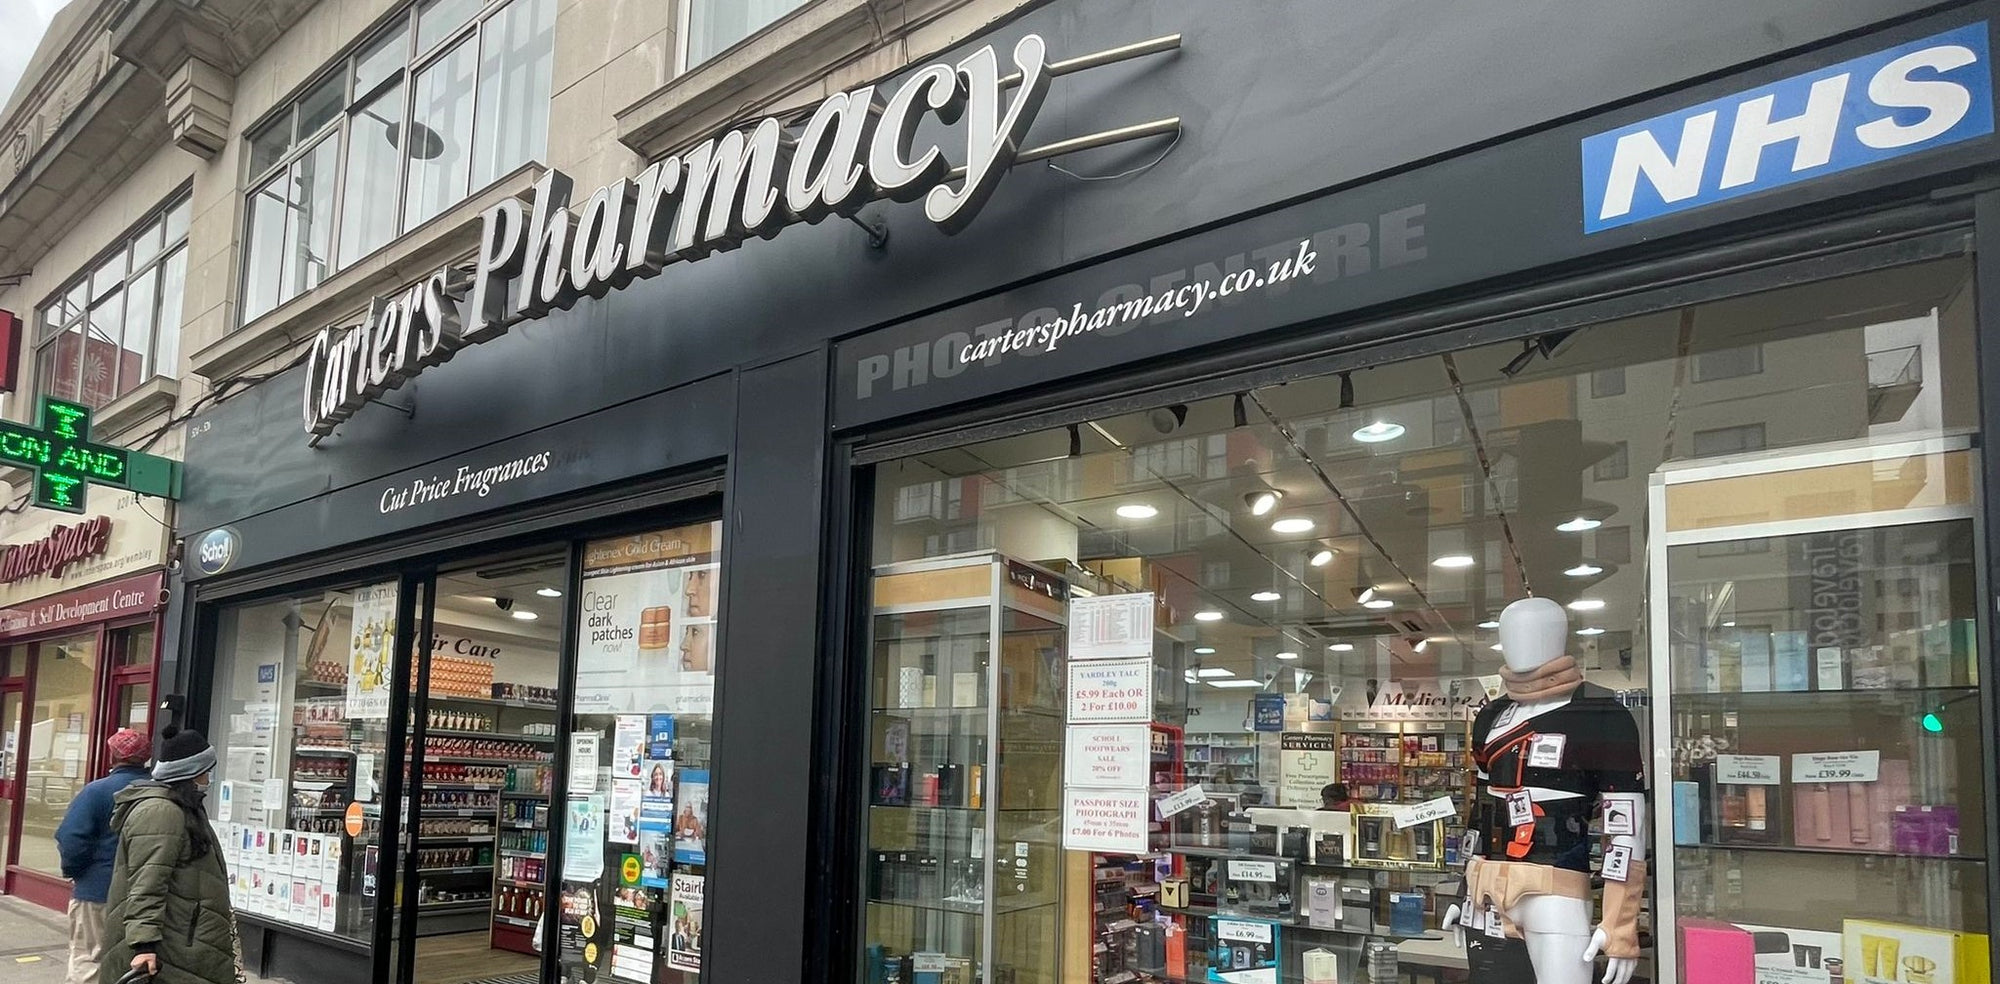 Carter's Pharmacy - Wembley High Road Mobility Aids & Disability Equipment Shop. Sports Supports specialist ranges for gym, fitness, arthritis and injury recovery.